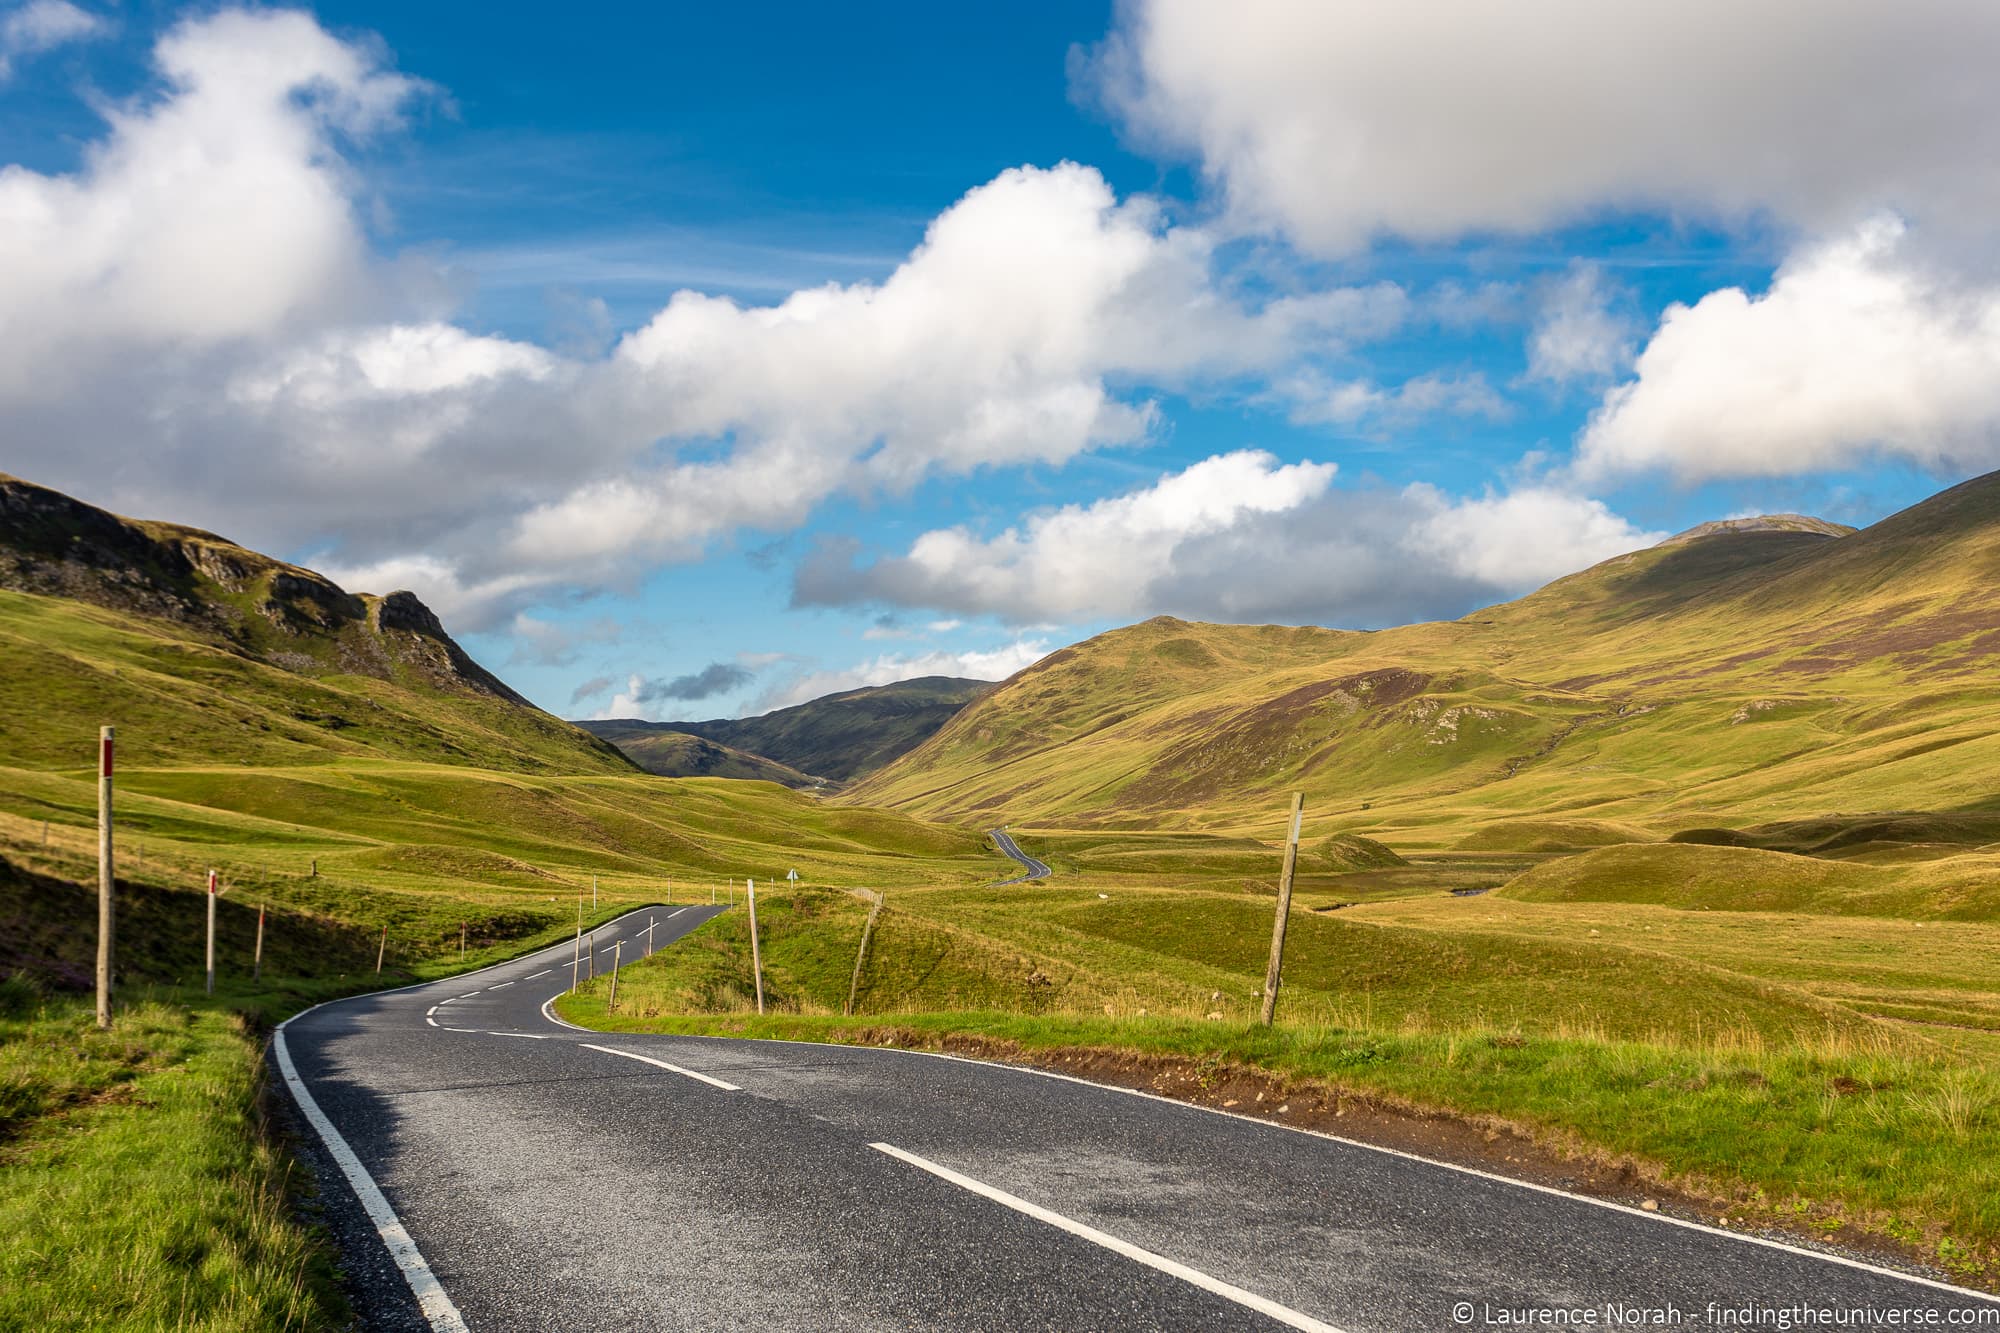 The North East 250: A 3 Day Scotland Road Trip Itinerary